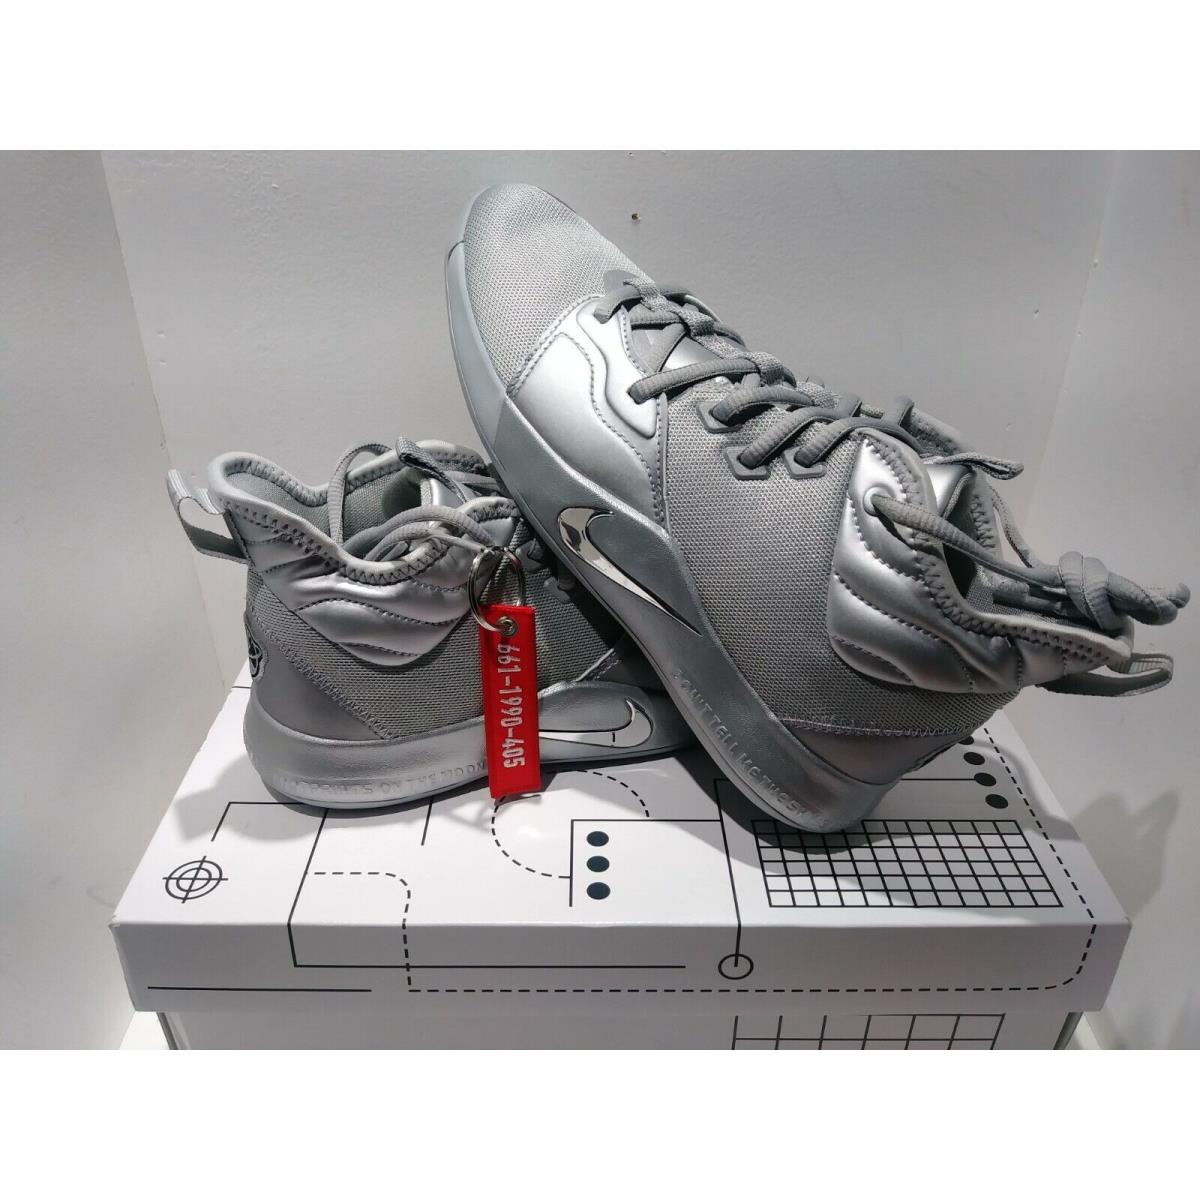 Nike PG 3 Nasa GS Paul George Reflect Silver Unisex Youth Shoes Size 7Y | - Nike shoes NASA - REFLECT Silver | SporTipTop